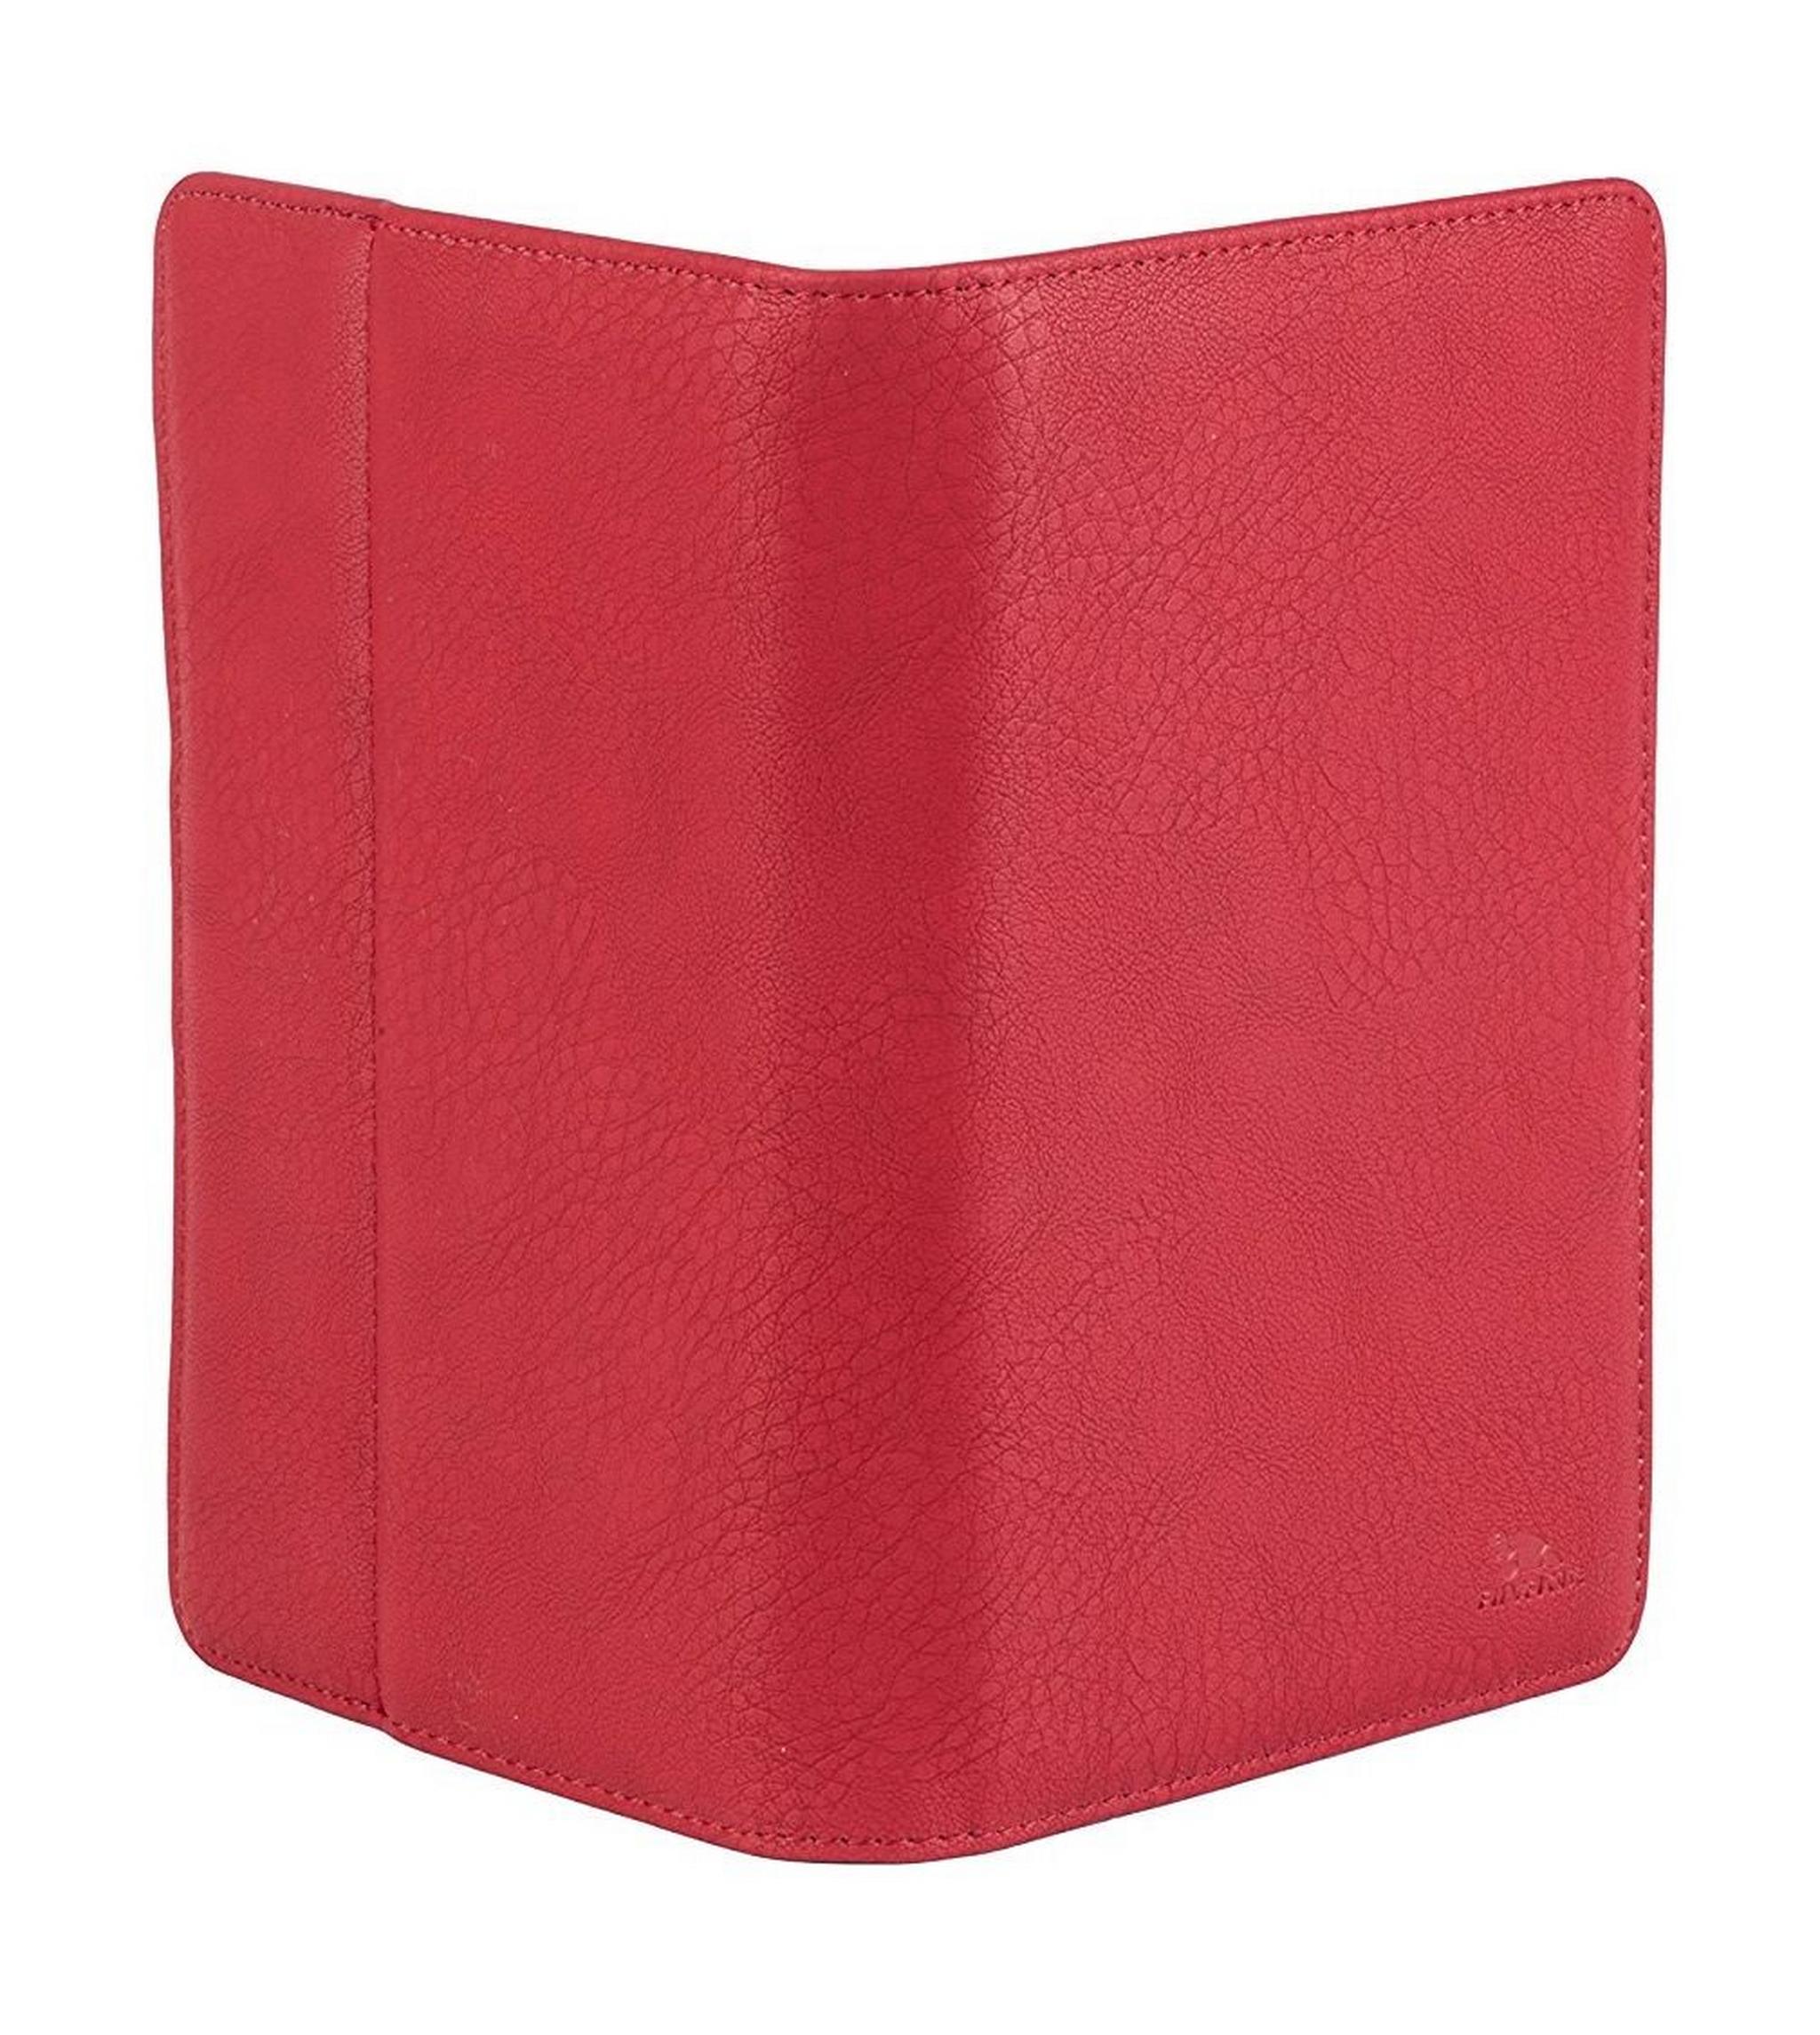 RivaCase Protective Case for 10 inch Tablet, 3017 - Red